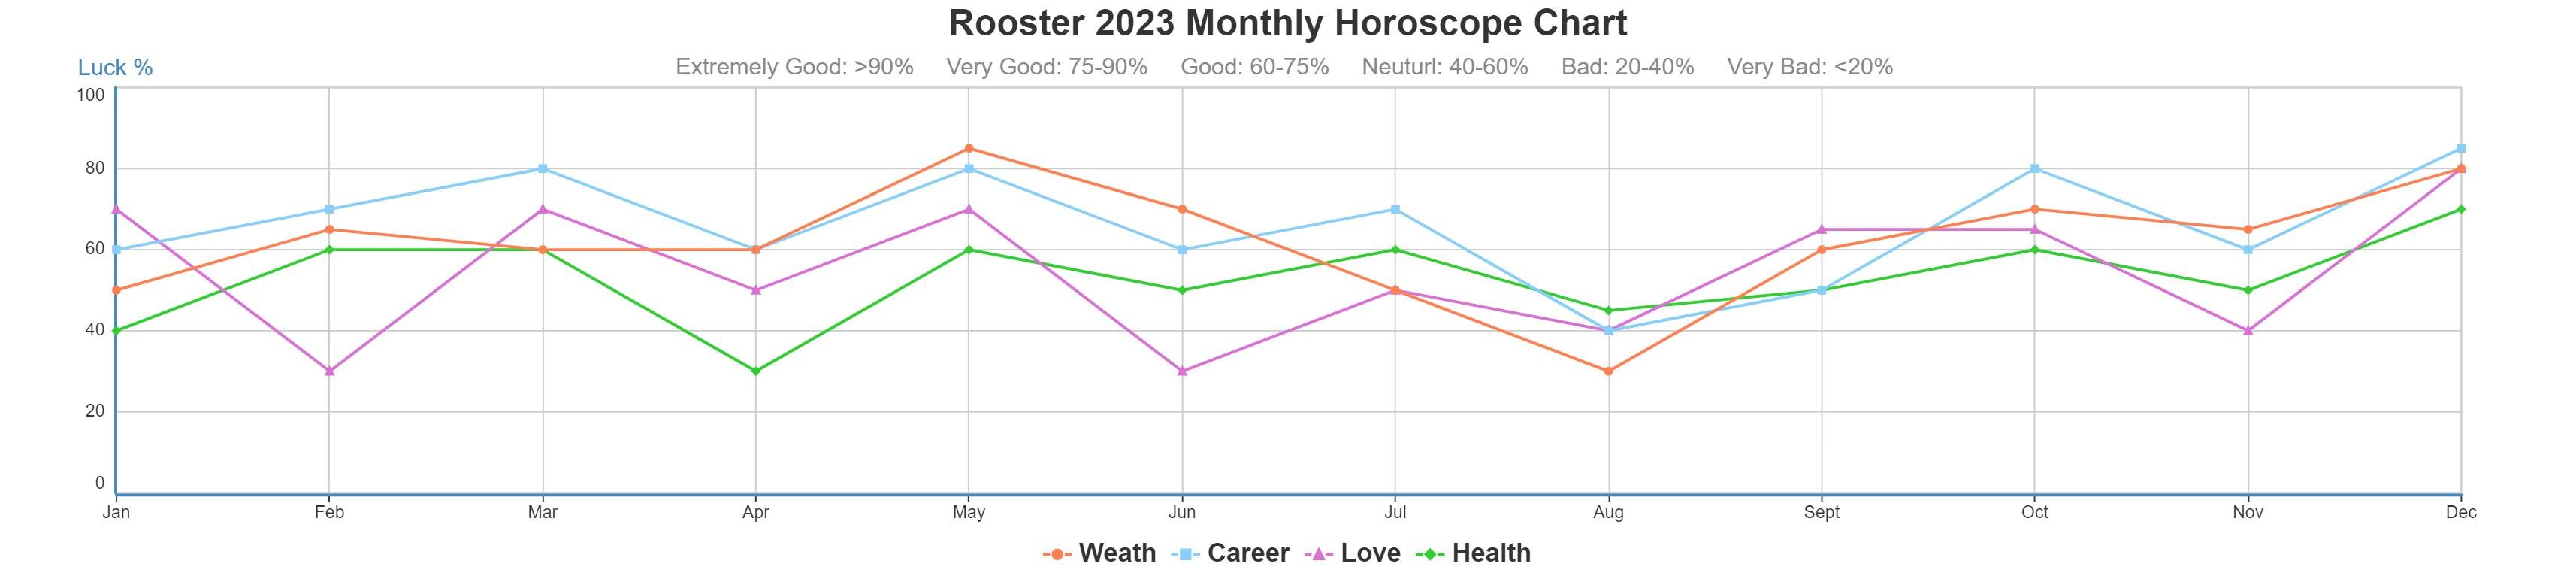 Rooster 2023 monthly horoscope